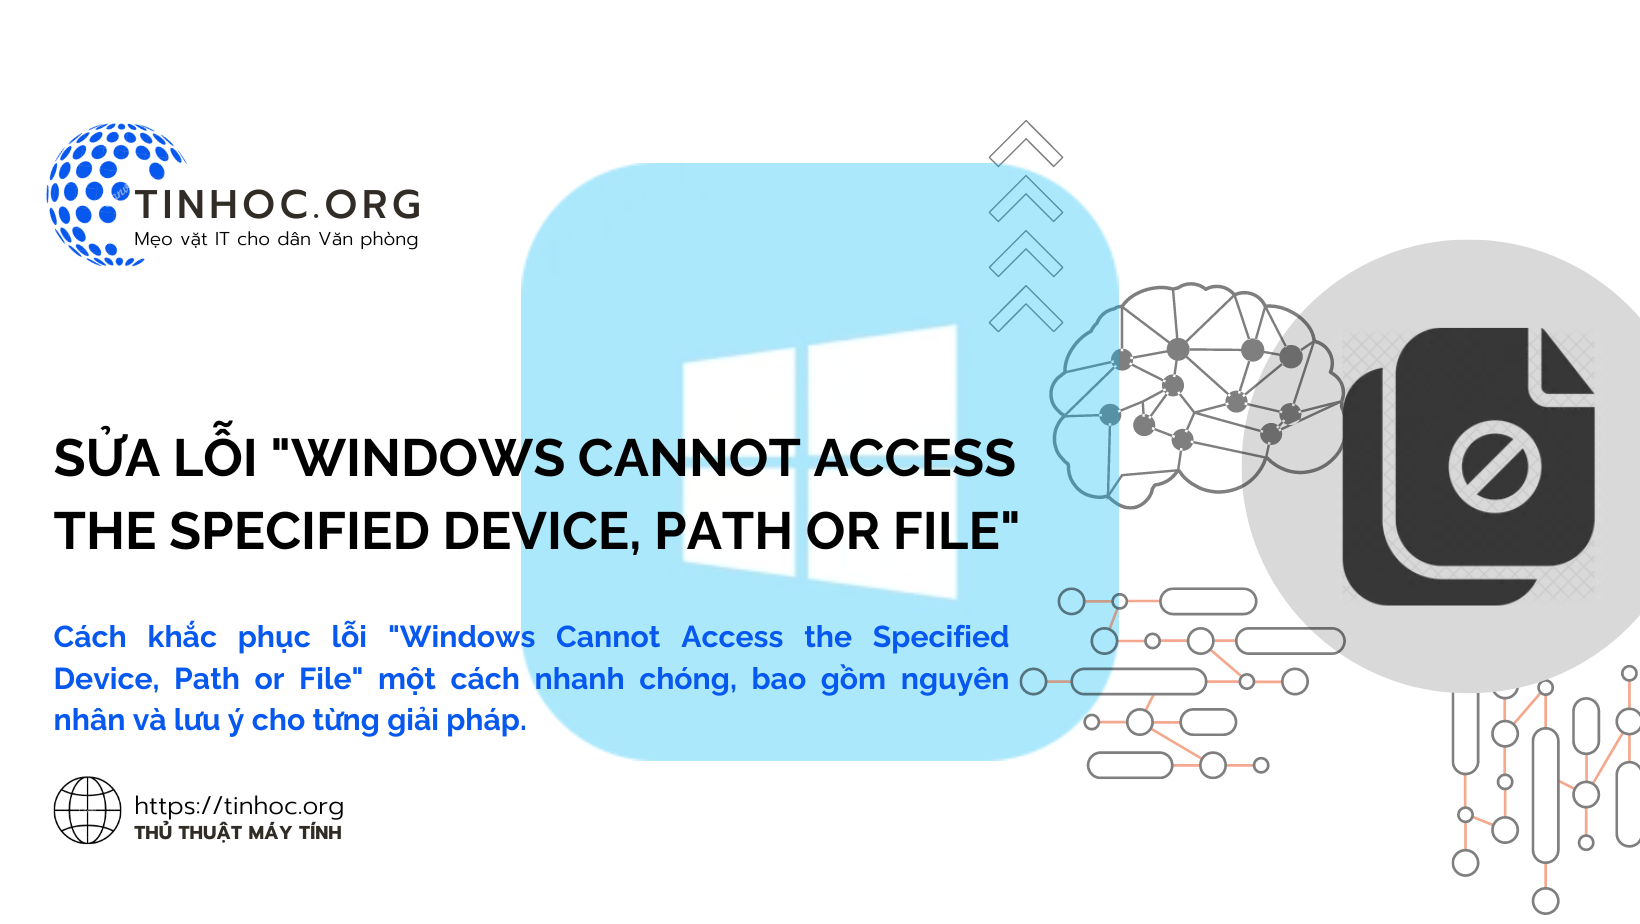 Sửa lỗi "Windows Cannot Access the Specified Device, Path or File"